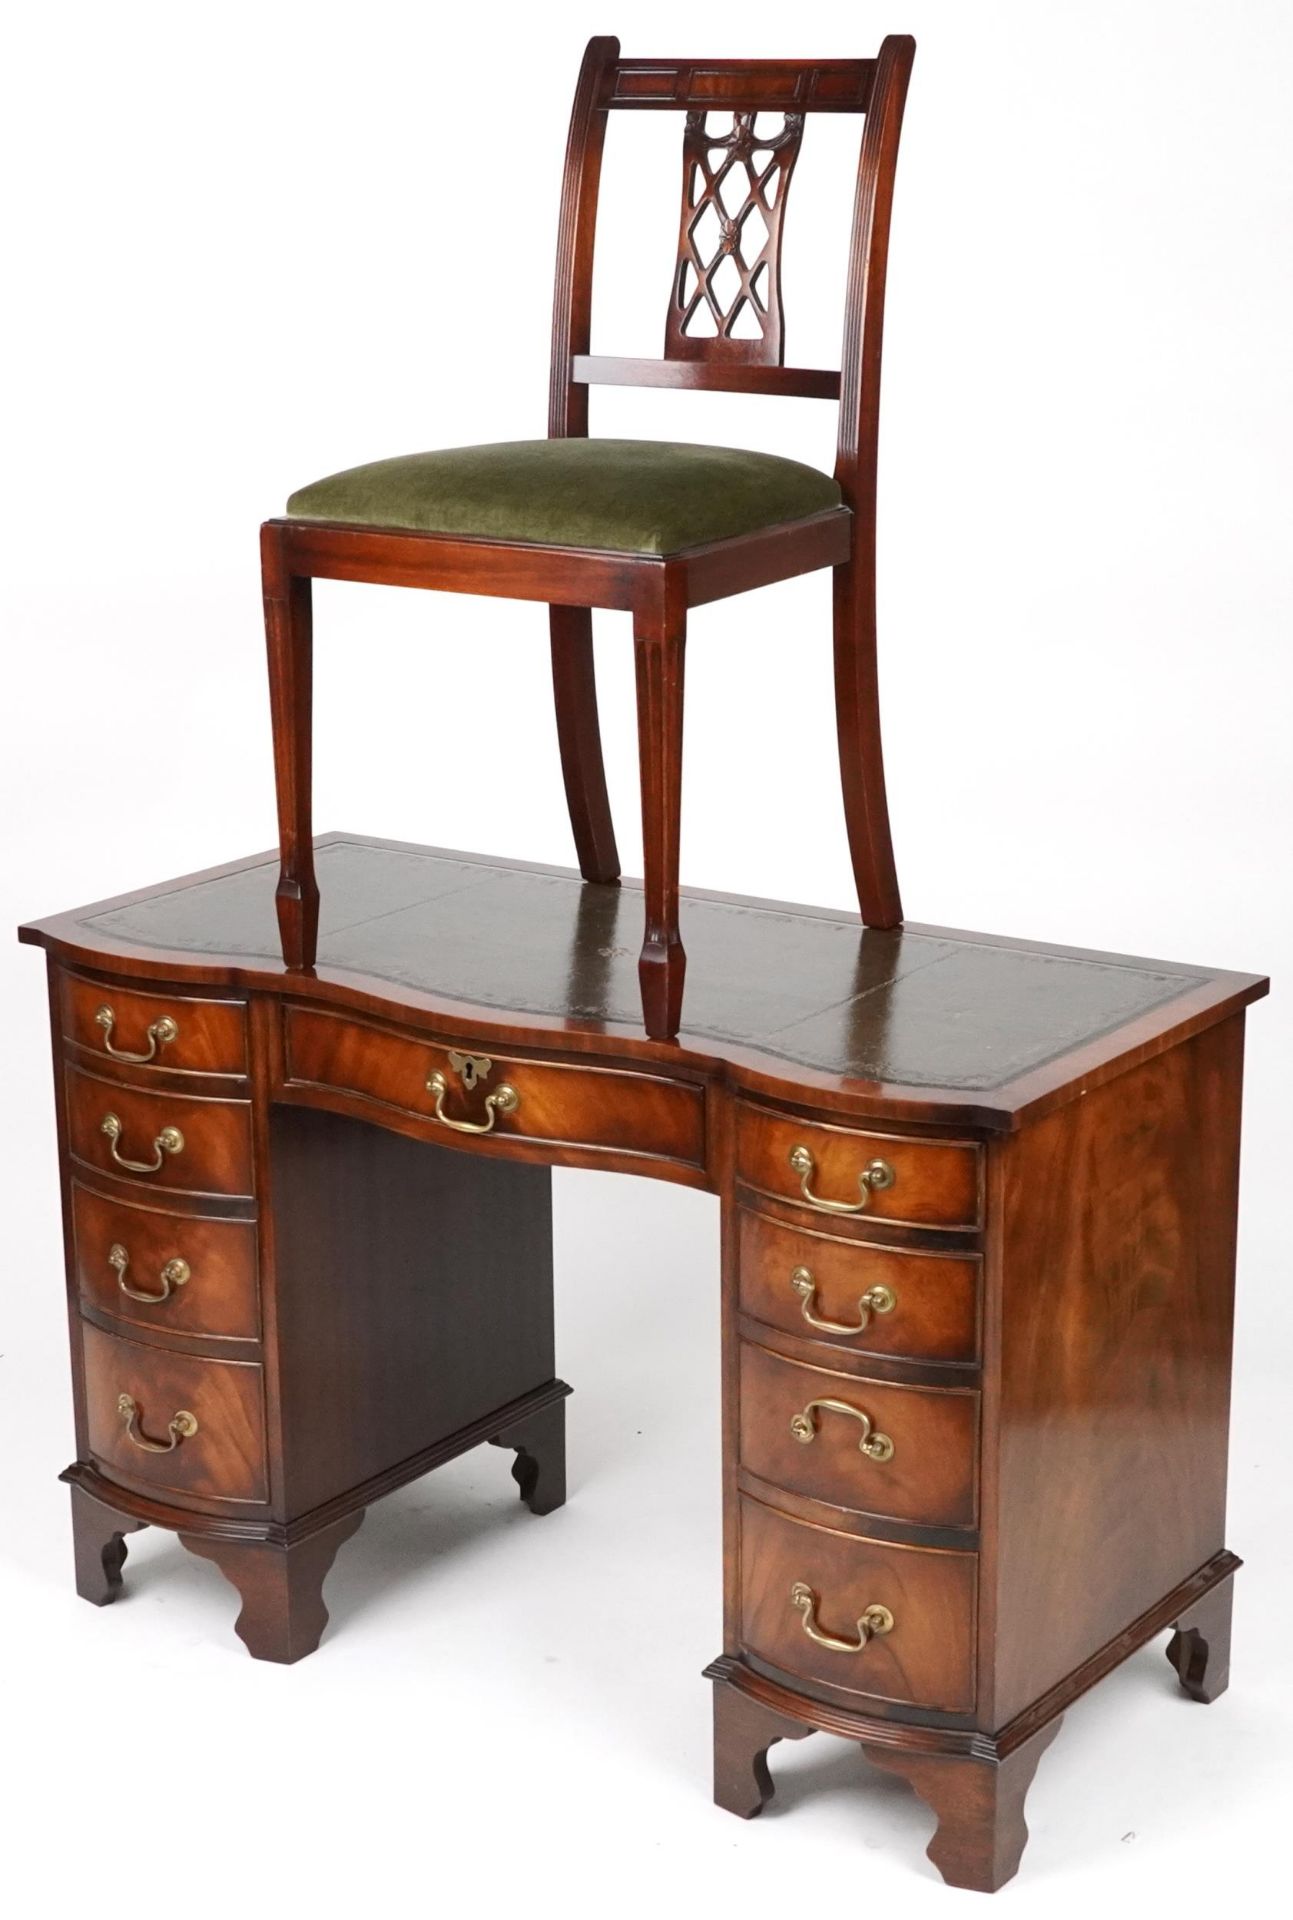 Mahogany serpentine front twin pedestal desk and a mahogany chair, the desk with nine drawers and - Image 2 of 9